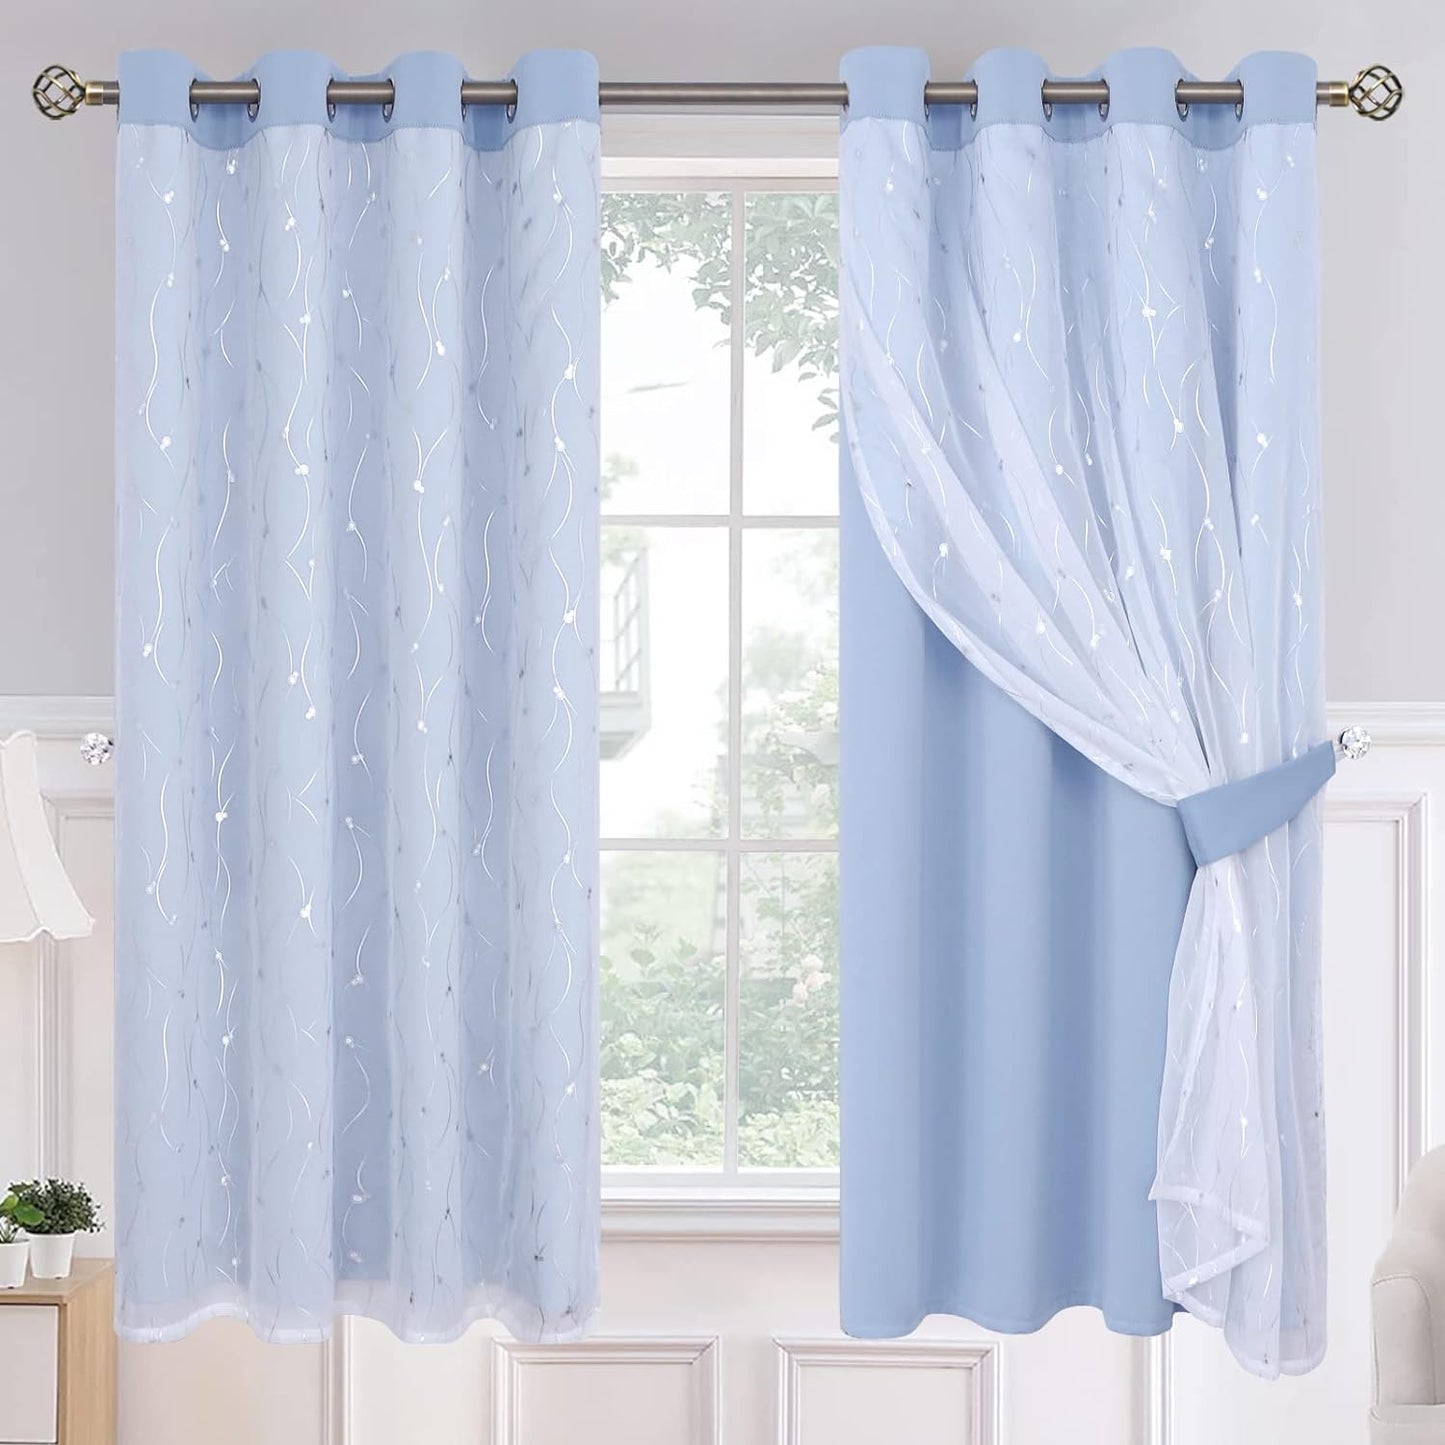 Bgment Grey Blackout Curtains with Sheer Overlay 84 Inches Long，Double Layer Silver Printed Kids Curtains Grommet Thermal Insulated Window Drapes for Living Room, 2 Panel, 52 X 84, Dark Grey  BGment Light Blue 52W X 63L 